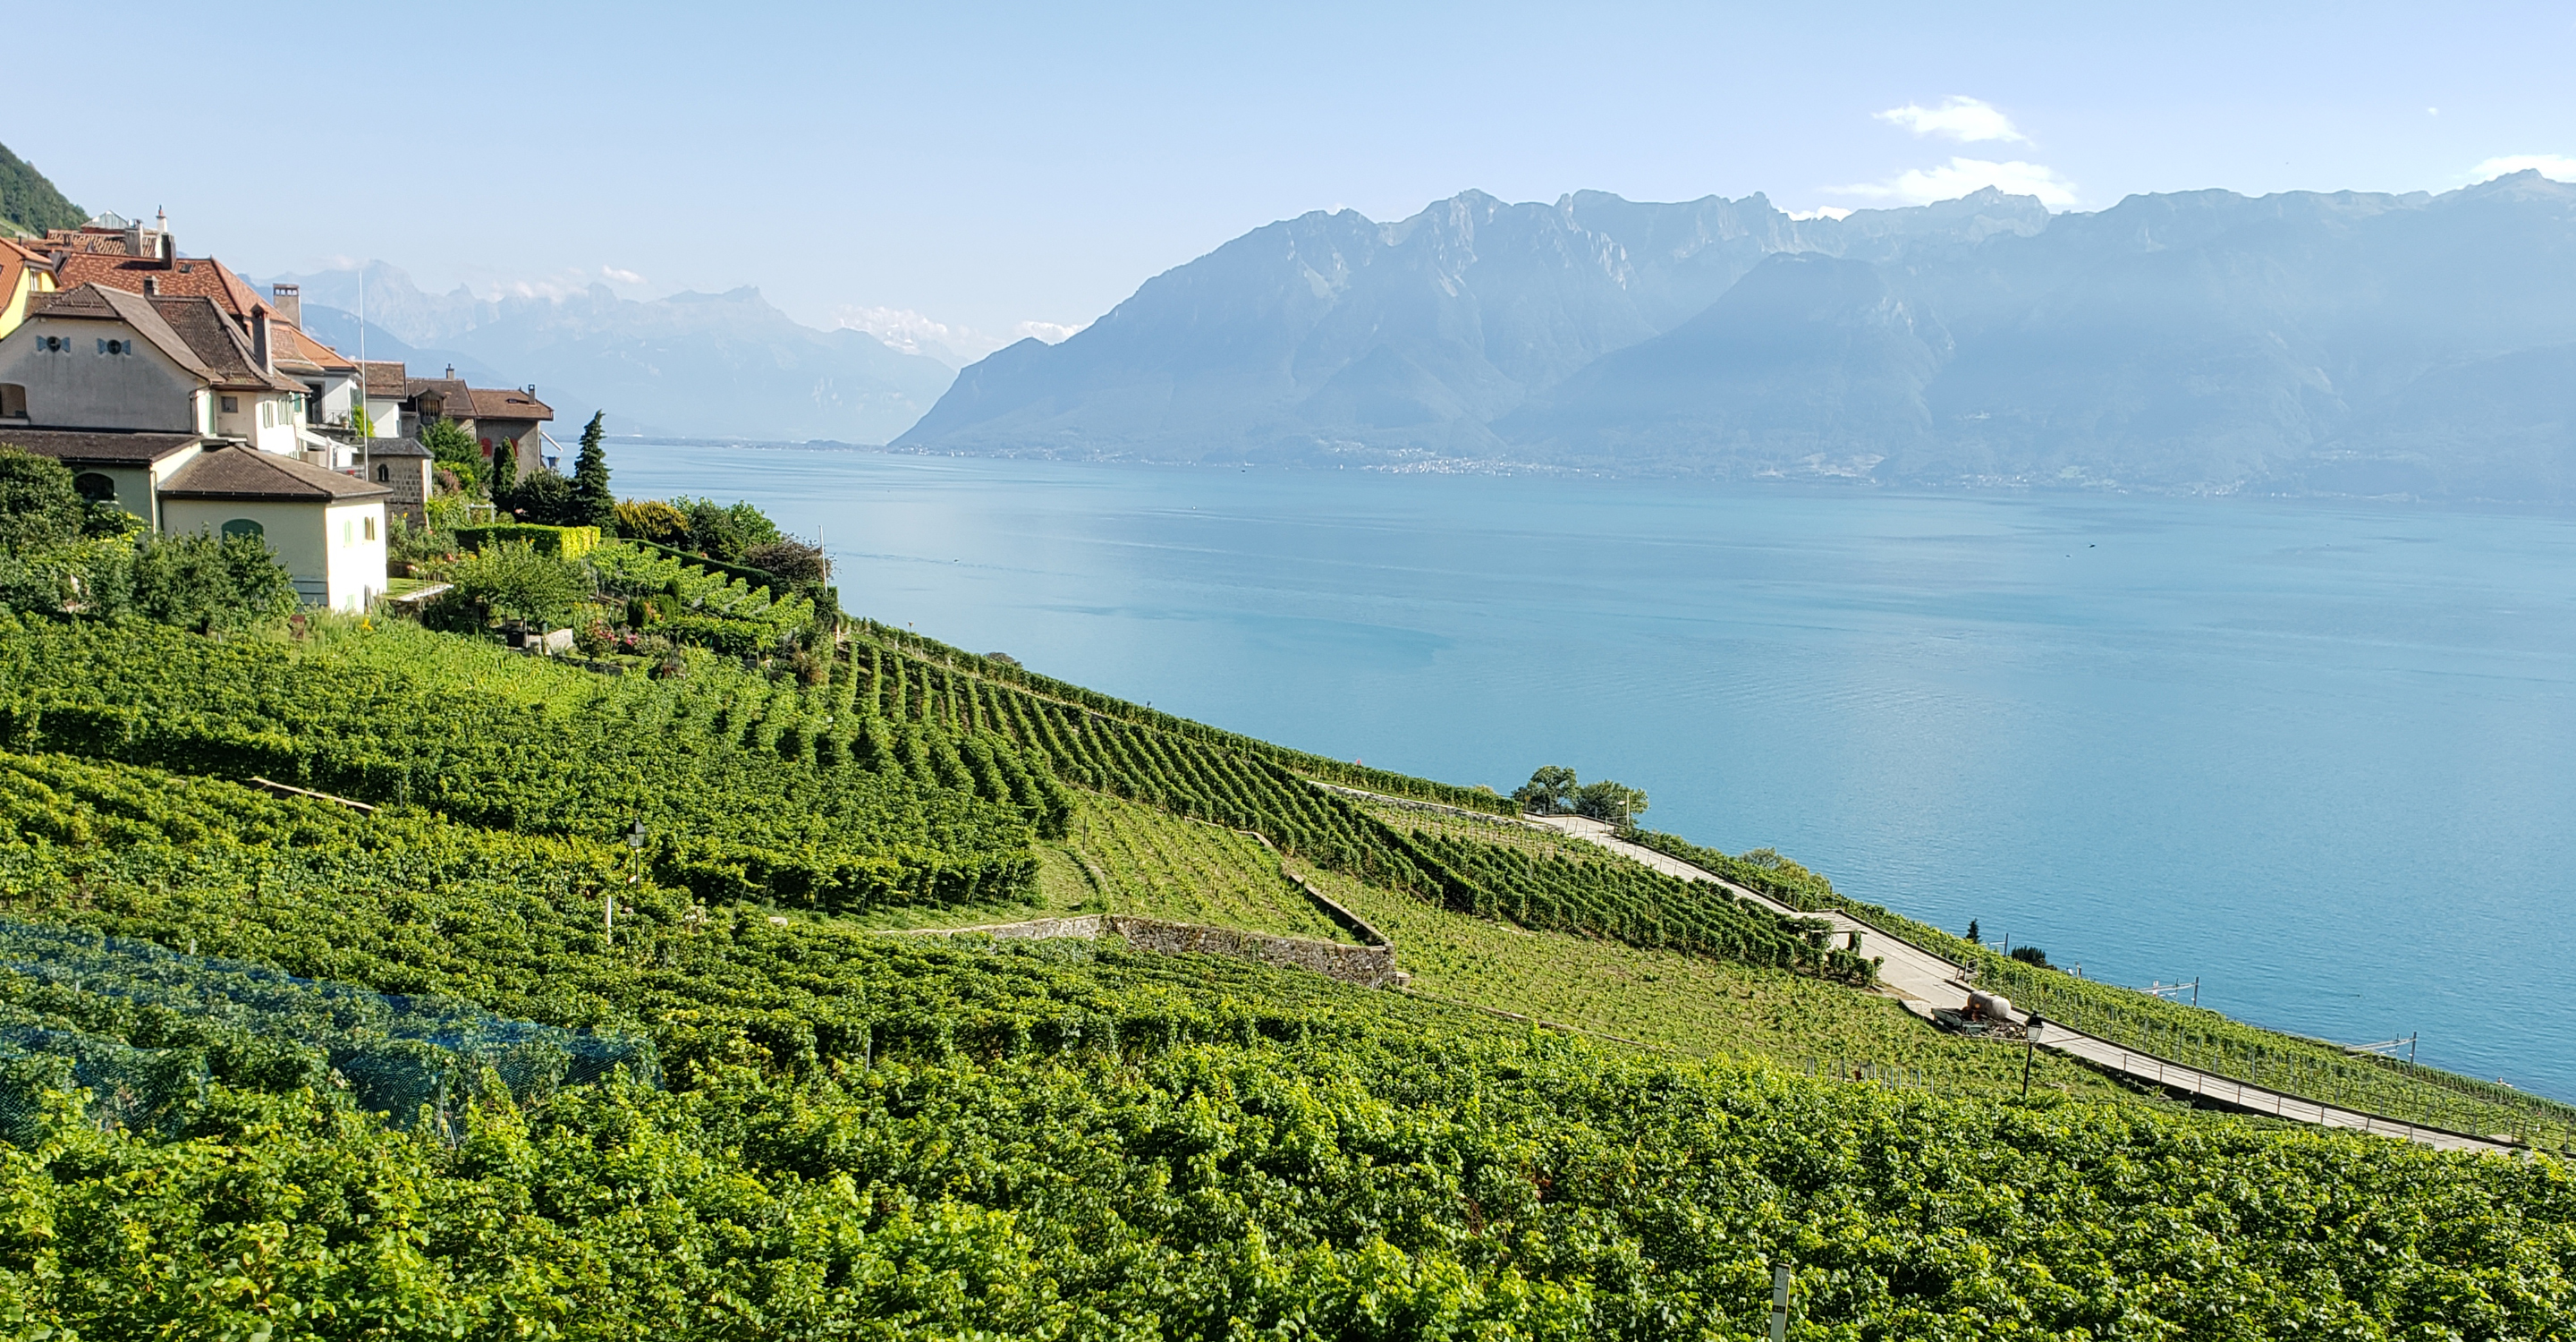 A view of the Lavaux Vineyard Terraces, World Heritage Vineyards, in Montreux, Switzerland